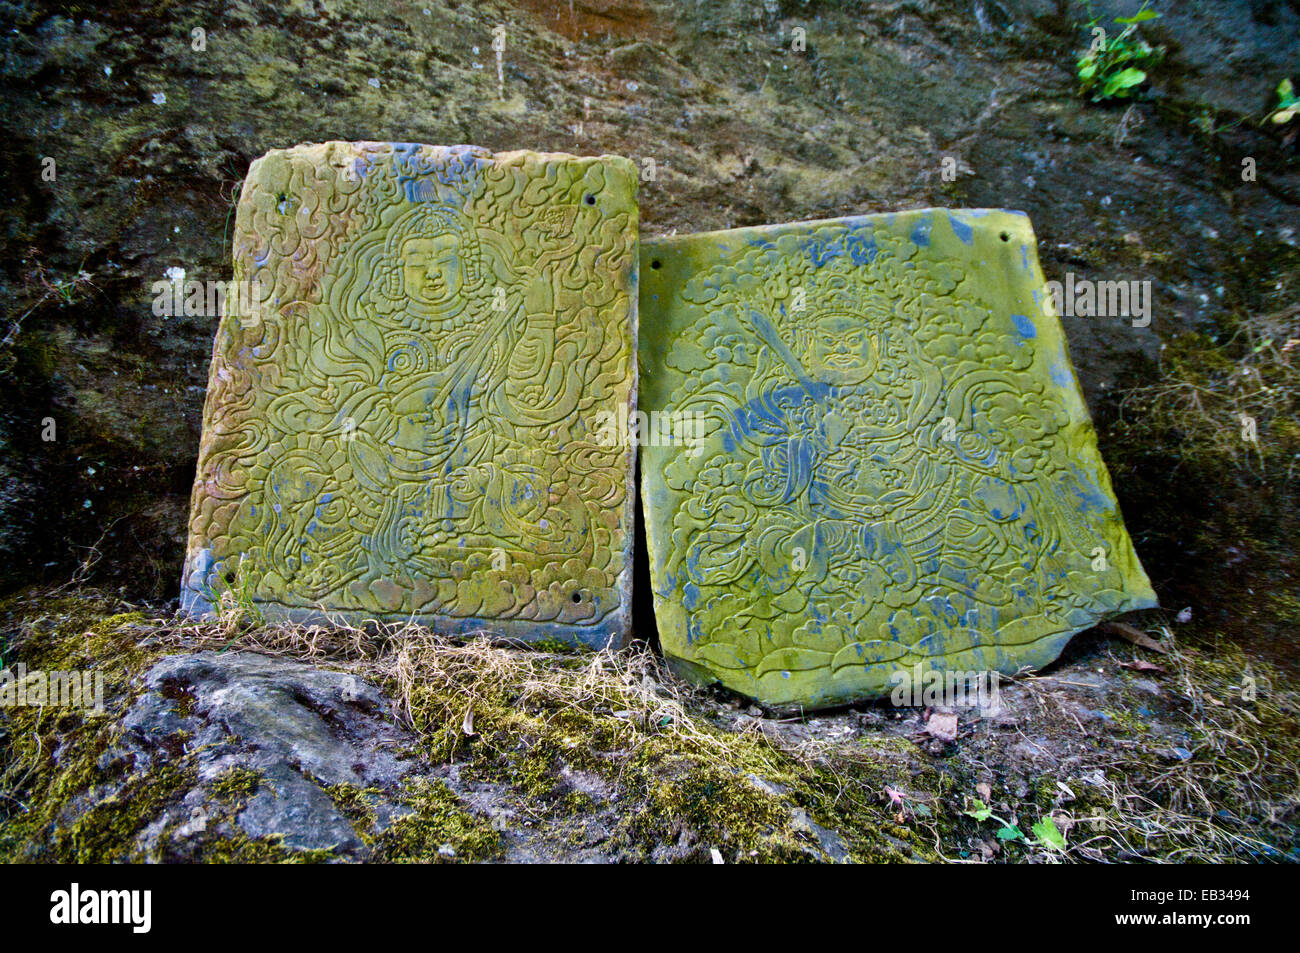 Lichen encrusted stone tablets at a Buddhist monastery featuring engravings of two bodhisattvas Stock Photo